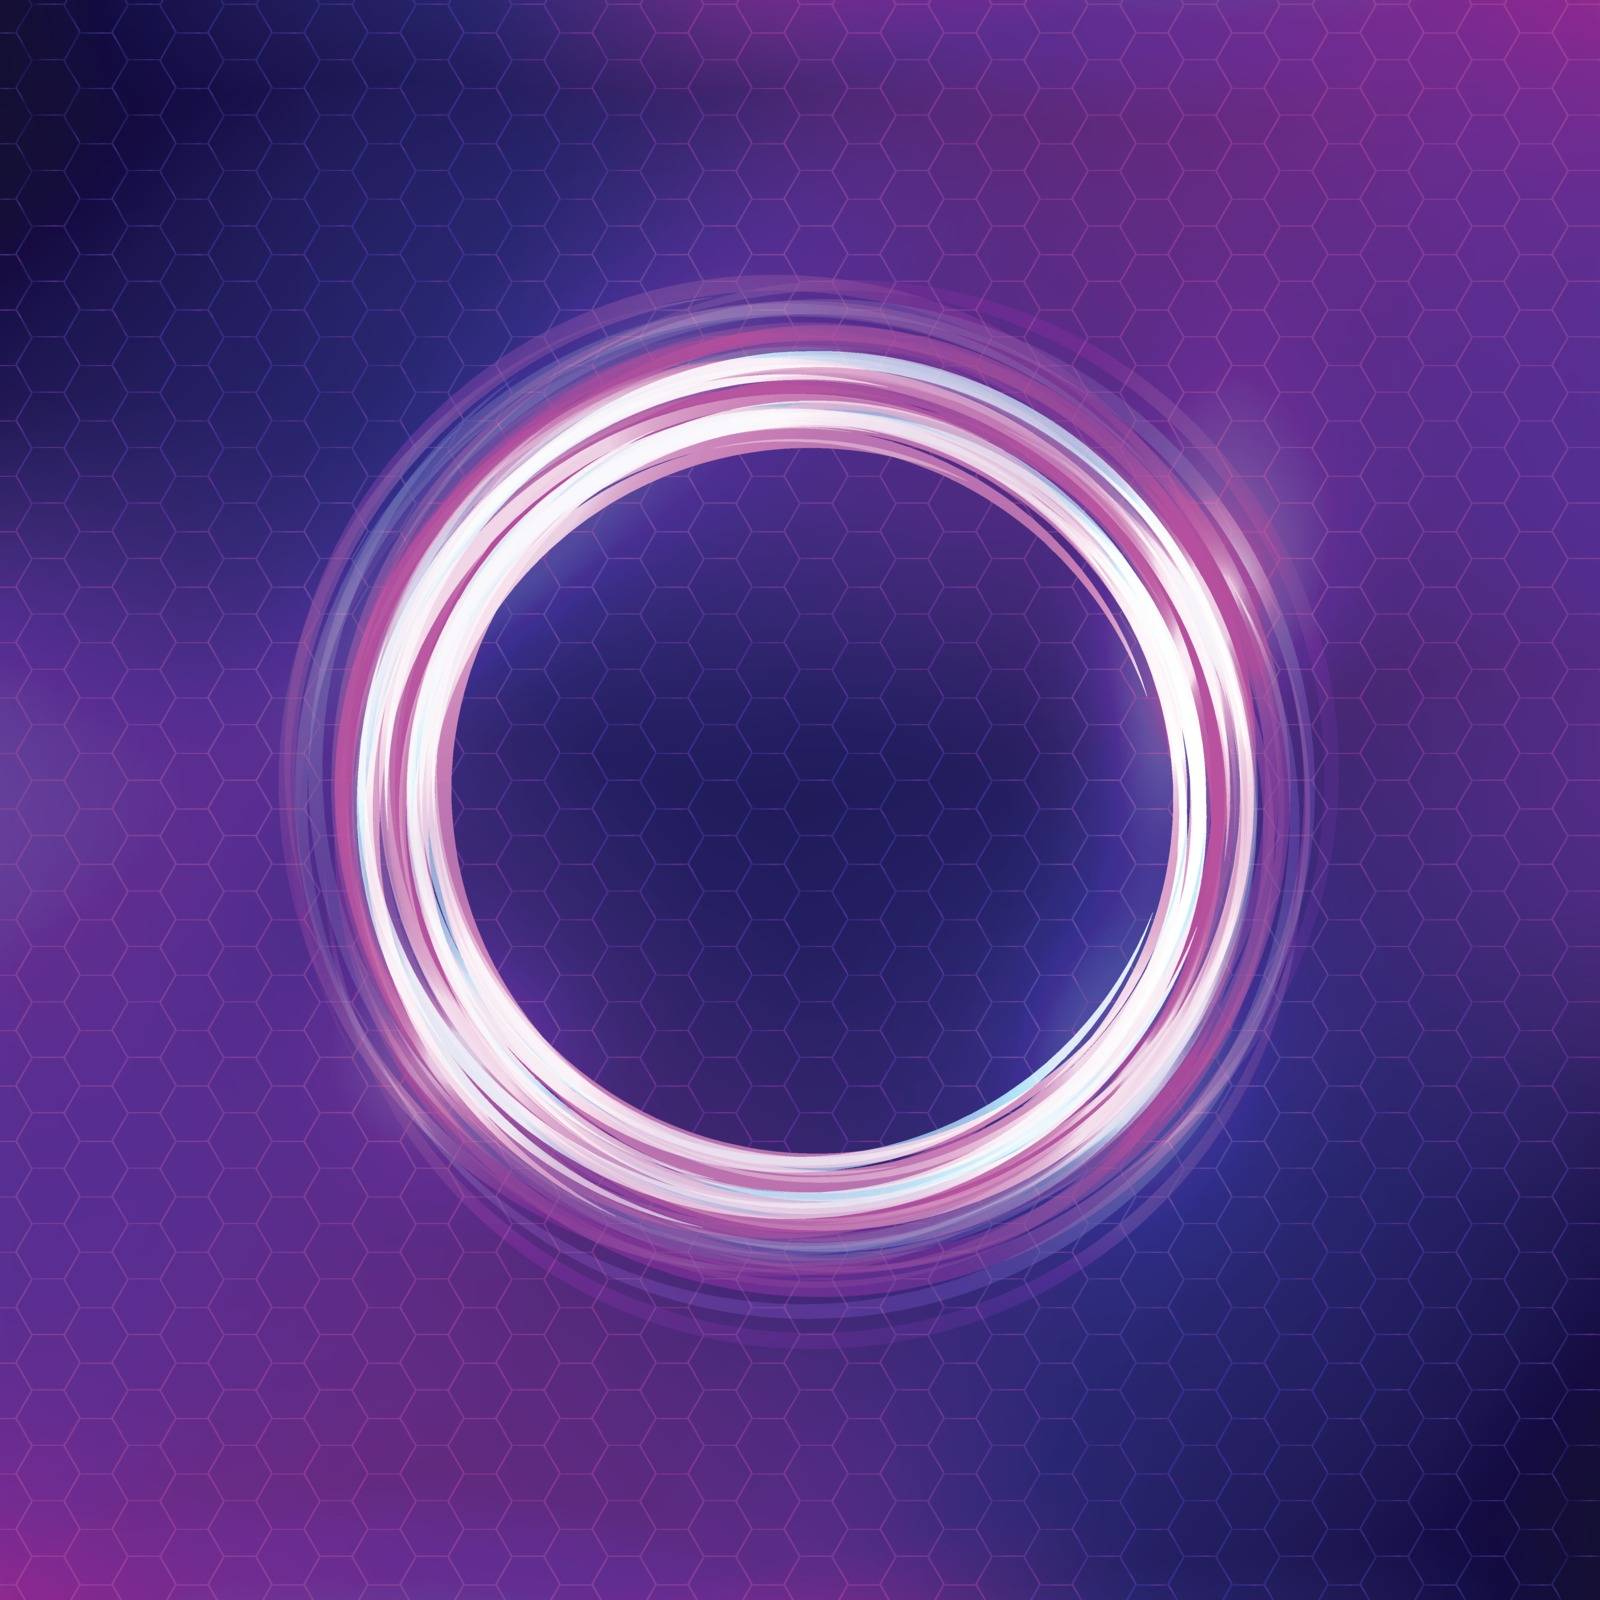 Abstract purple design with illuminated circles. Hexagonal grid in the background.